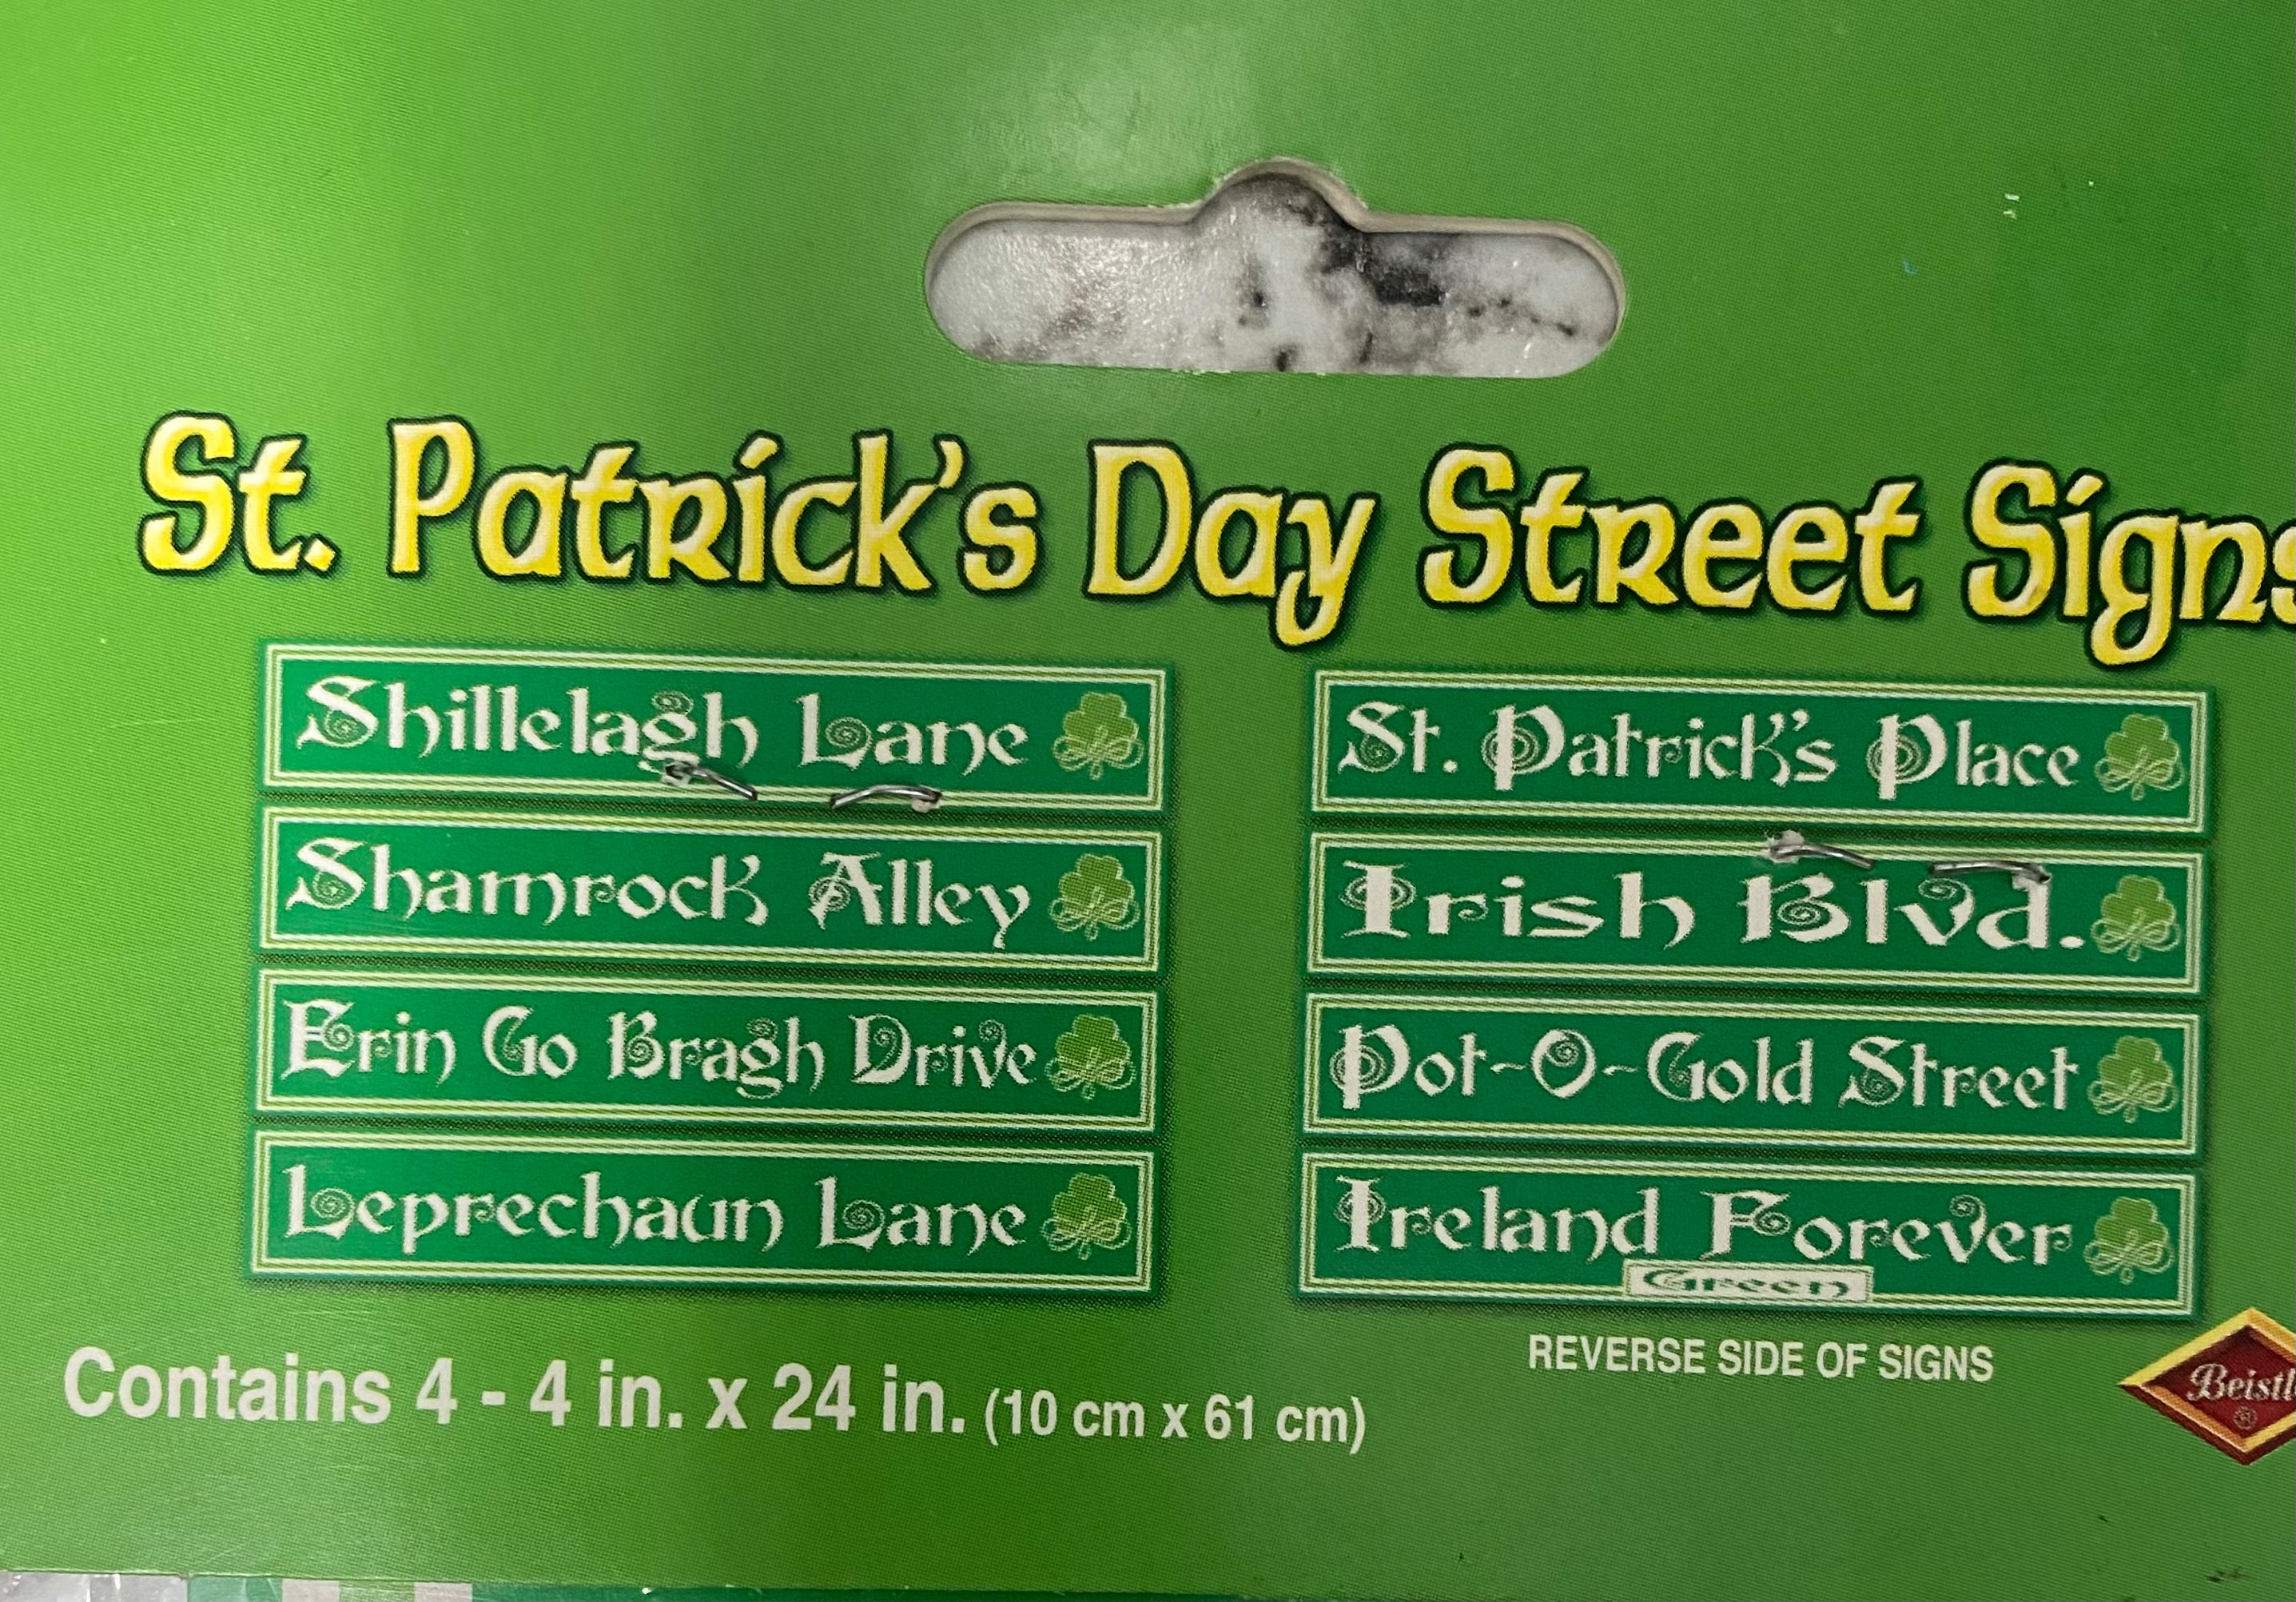 St. Patrick's Day Street Signs